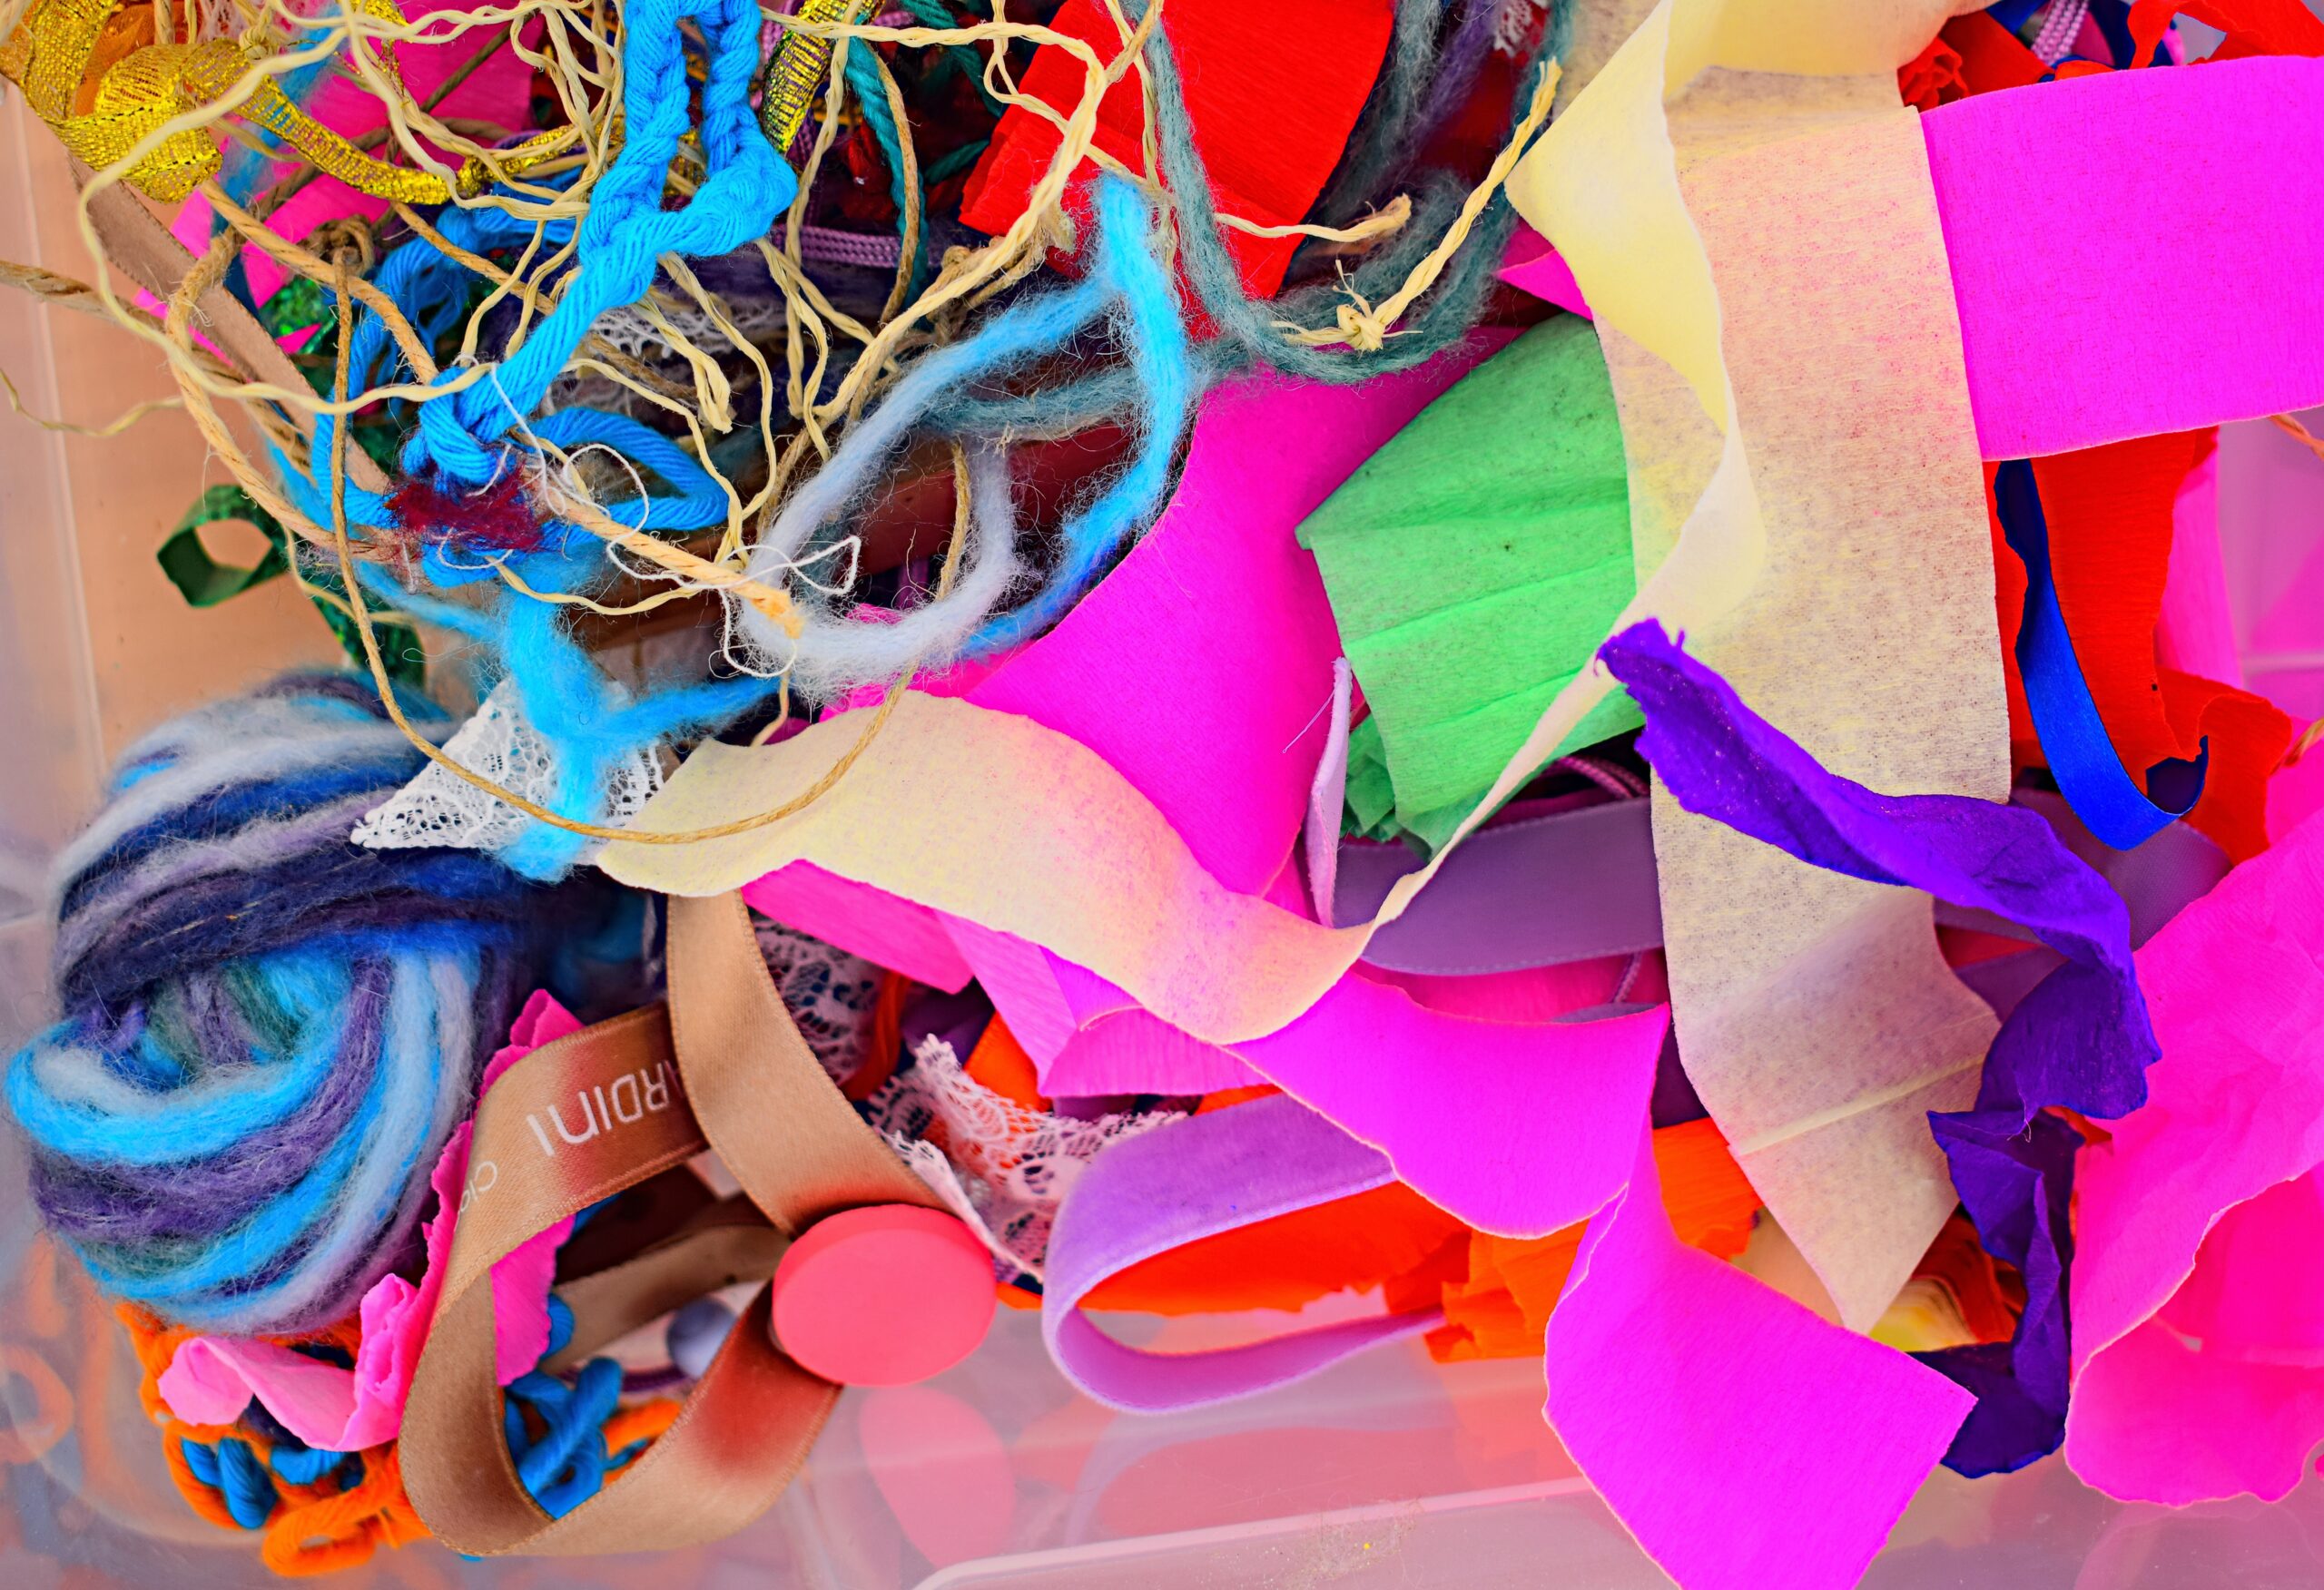 A colourful photograph of bits of scrap materials including paper, string, and other vibrant odds and ends that can be used to make interesting new art pieces